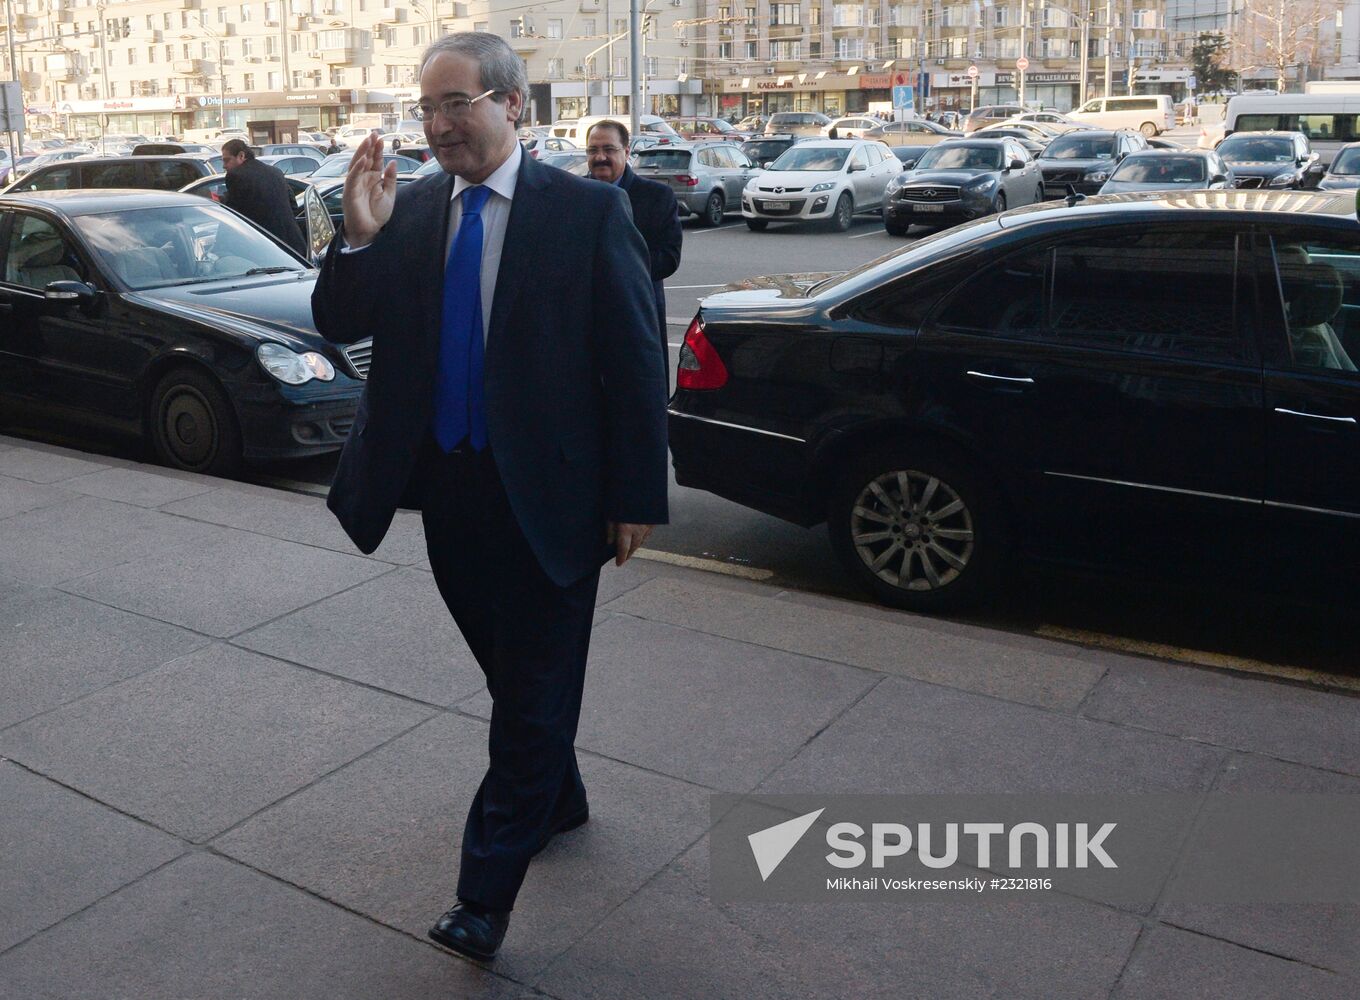 Representatives of Syrian government arrive in Moscow